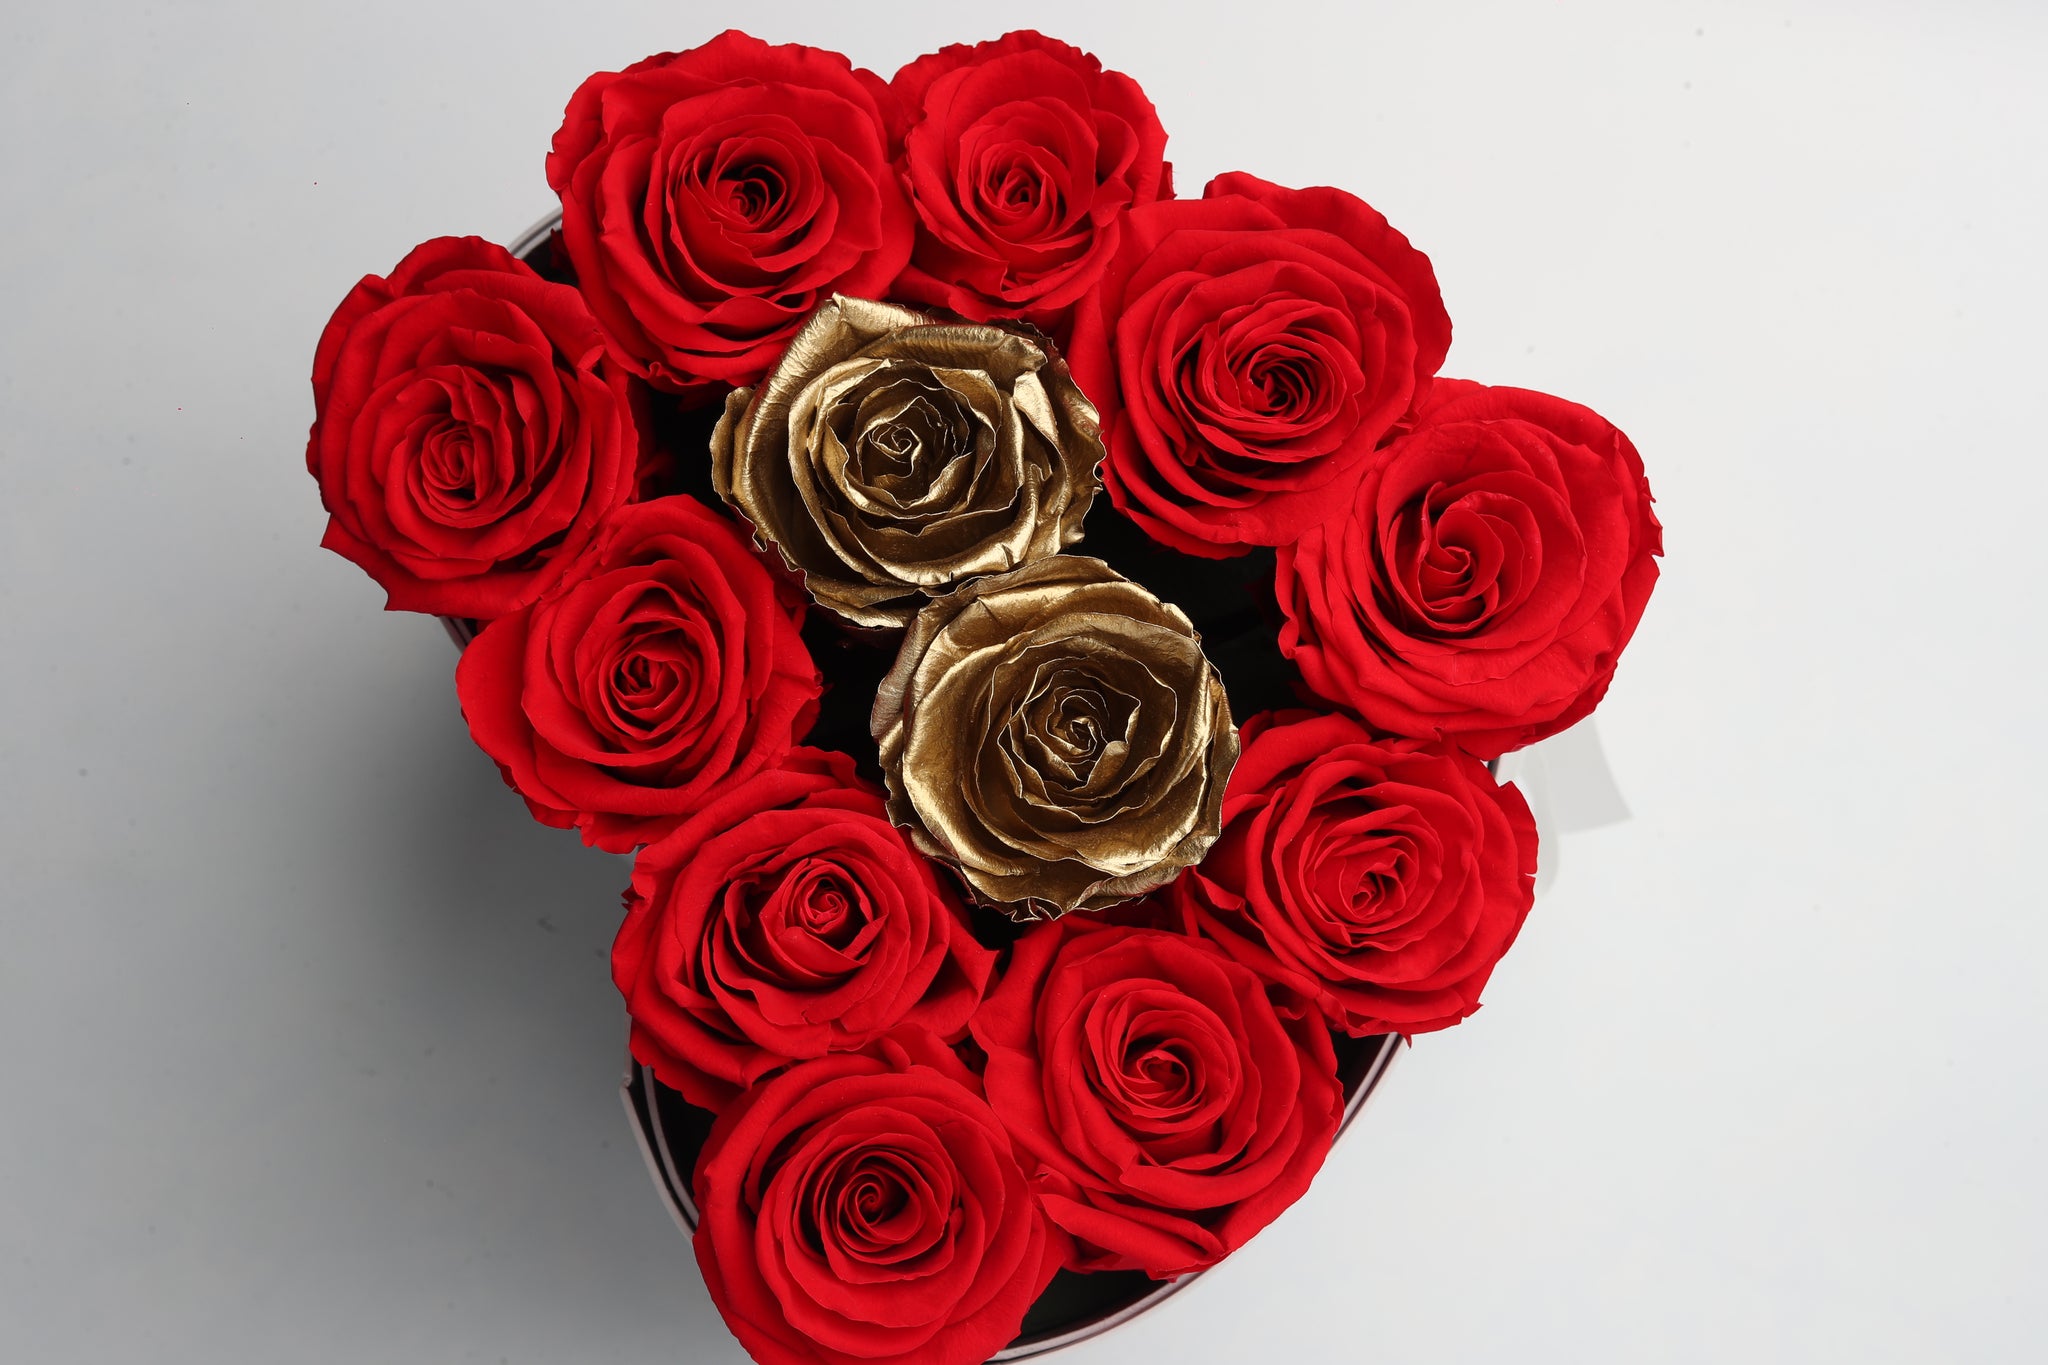 Sweet & Love Luxury Box/ Red and Gold roses